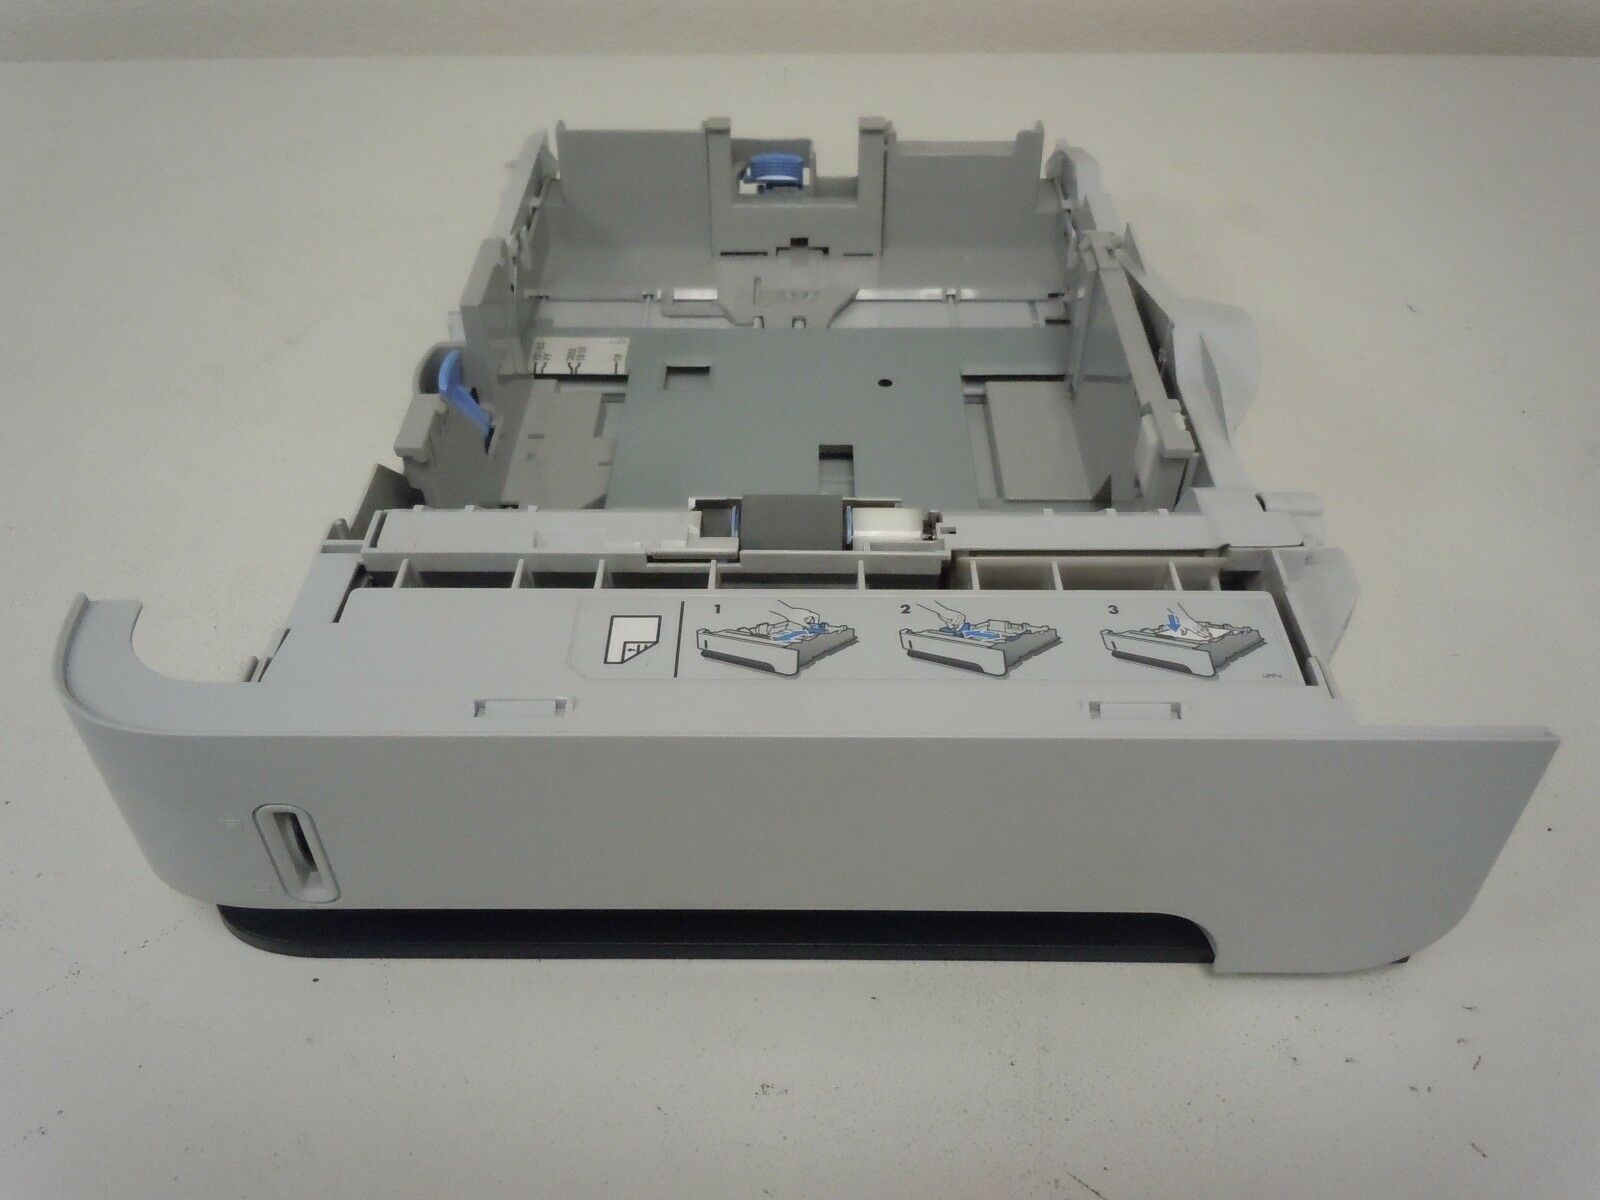 HP Refurbished RM1-2219 500 Sheet Paper Tray/Cassette - This is only the tray, does not include feeder or frame that tray goes into